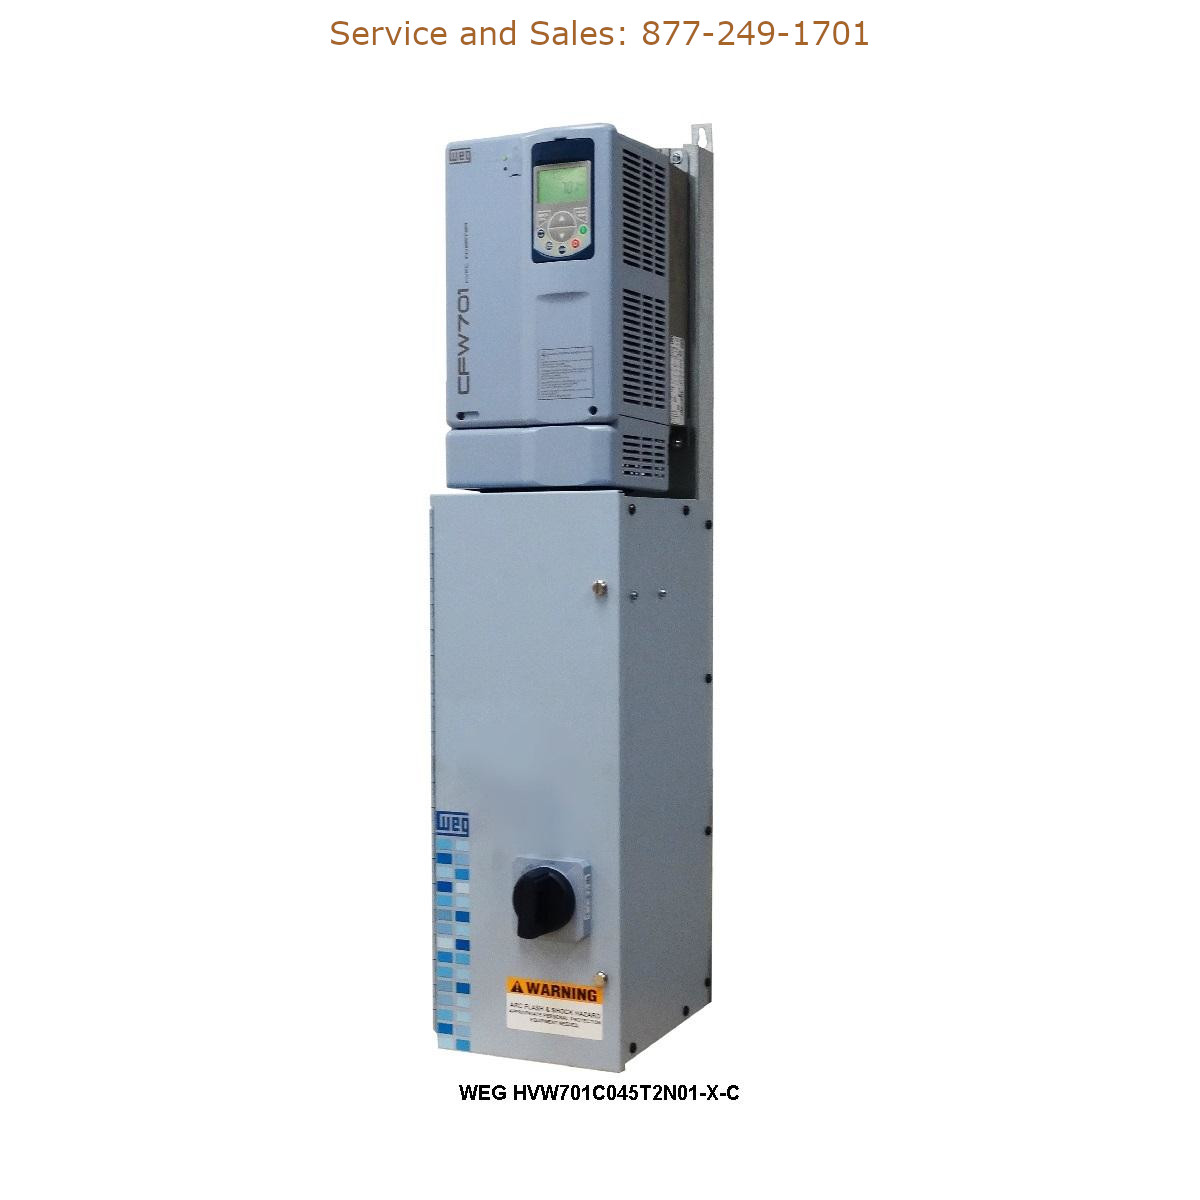 WEG HVW701C045T2N01-X-C WEG Model Number HVW701C045T2N01-X-C WEG Drives, Variable Speed Drives Repair Service, Troubleshooting, Replacement Parts https://gesrepair.com/wp-content/uploads/2022/WEG/WEG_HVW701C045T2N01-X-C_Drives_Variable_Speed_Drives.jpg